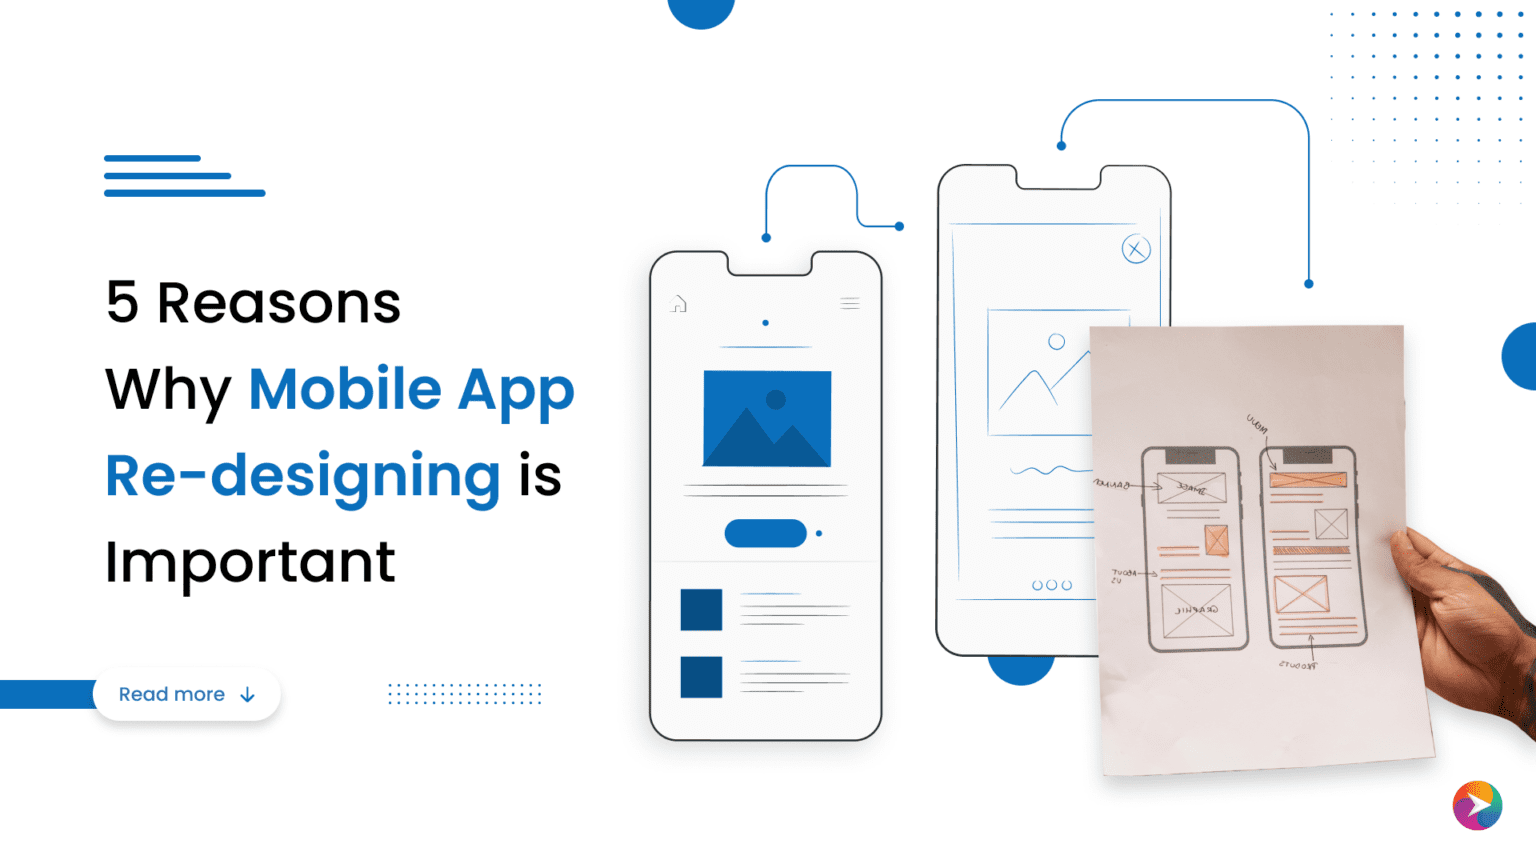 5 Reasons Why Mobile App Re-designing is Important